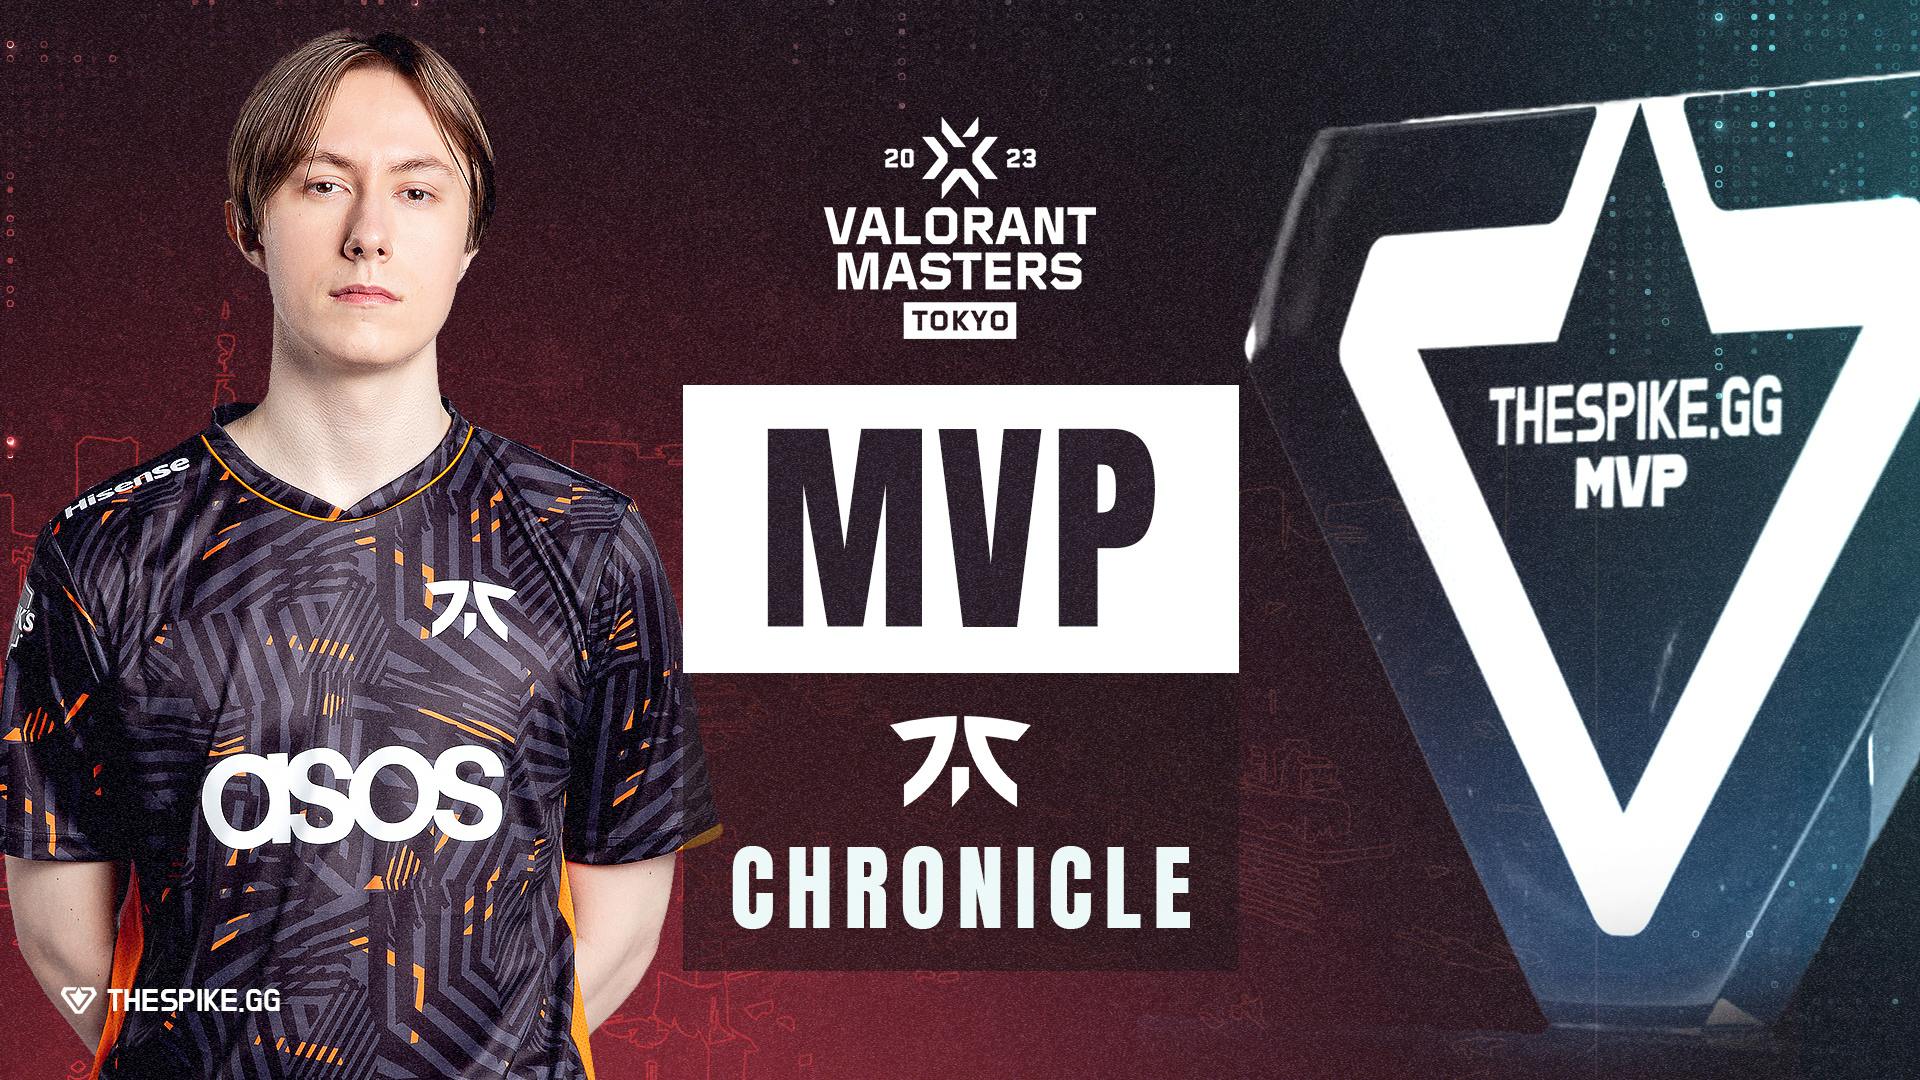 Chronicle wins THESPIKE.GG MVP trophy following VALORANT Masters Tokyo 